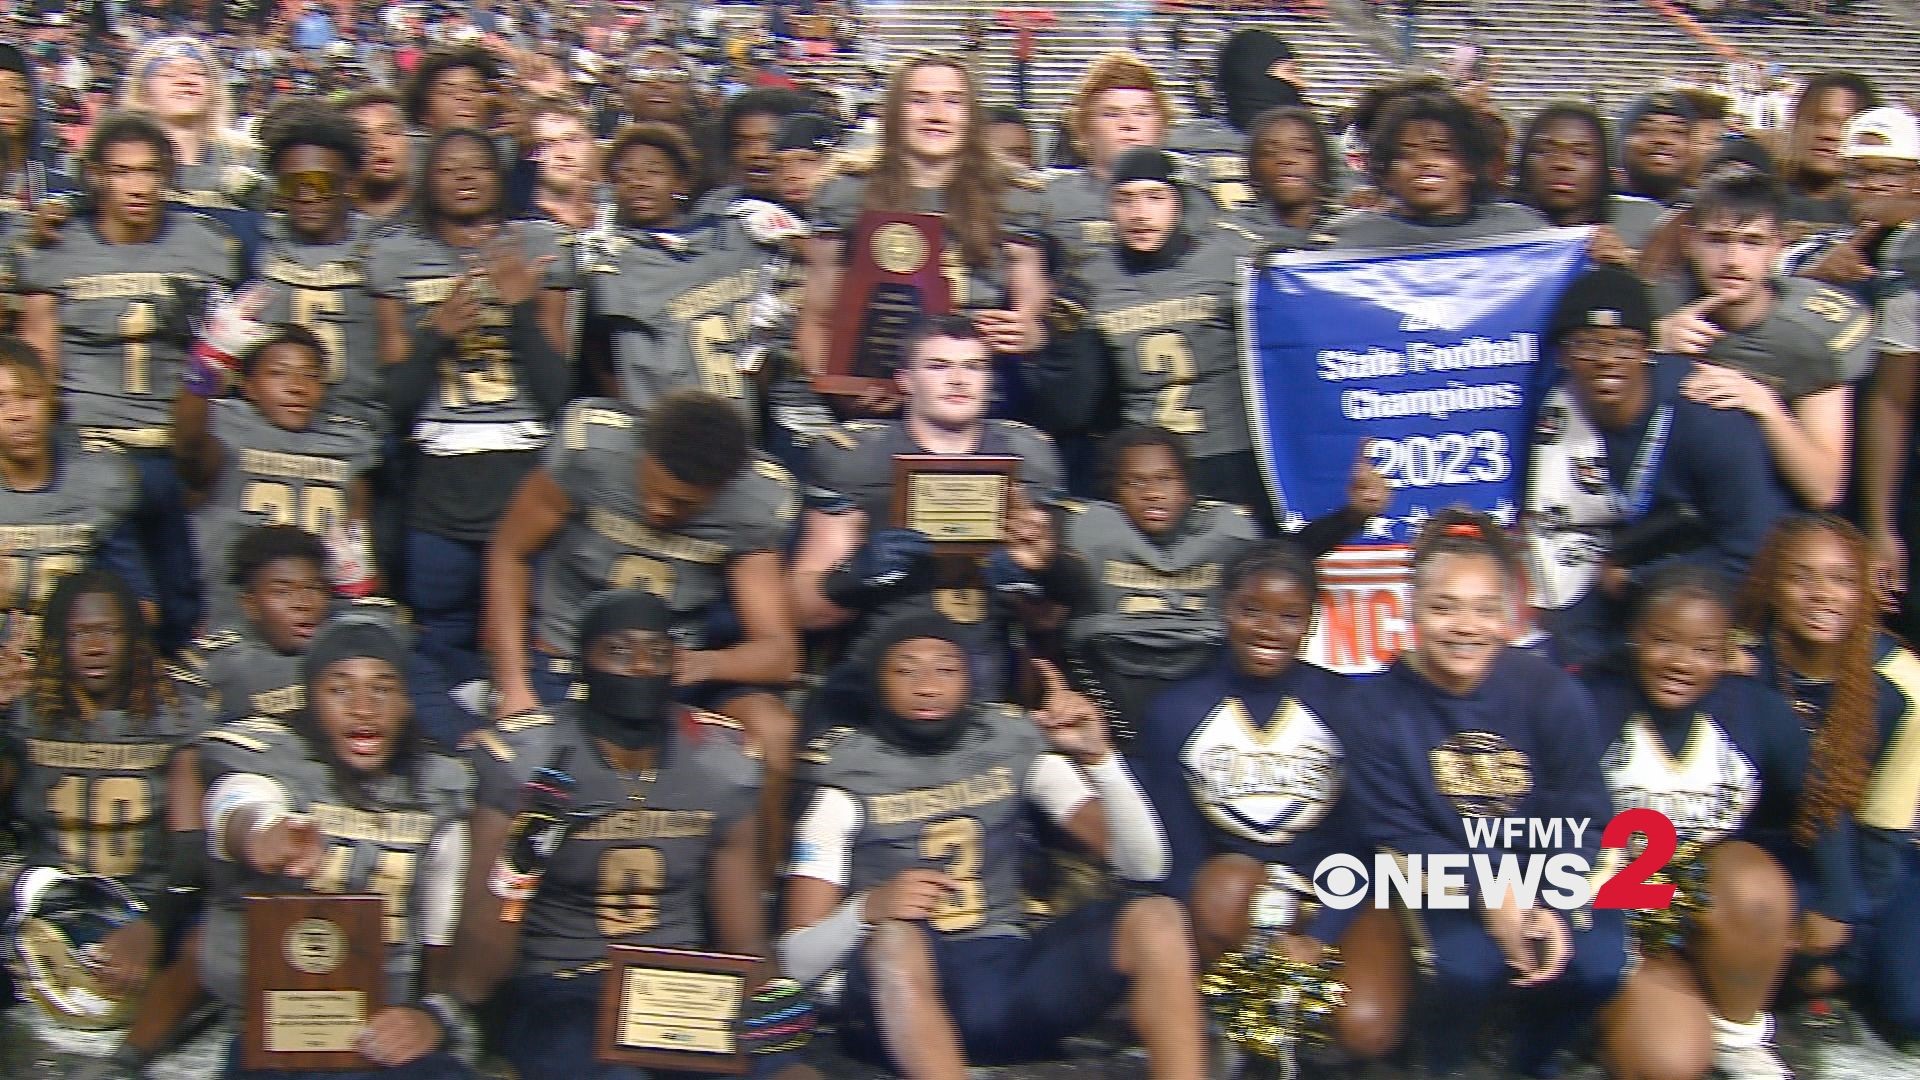 The win gave the Rams their 23rd State Title in program history.